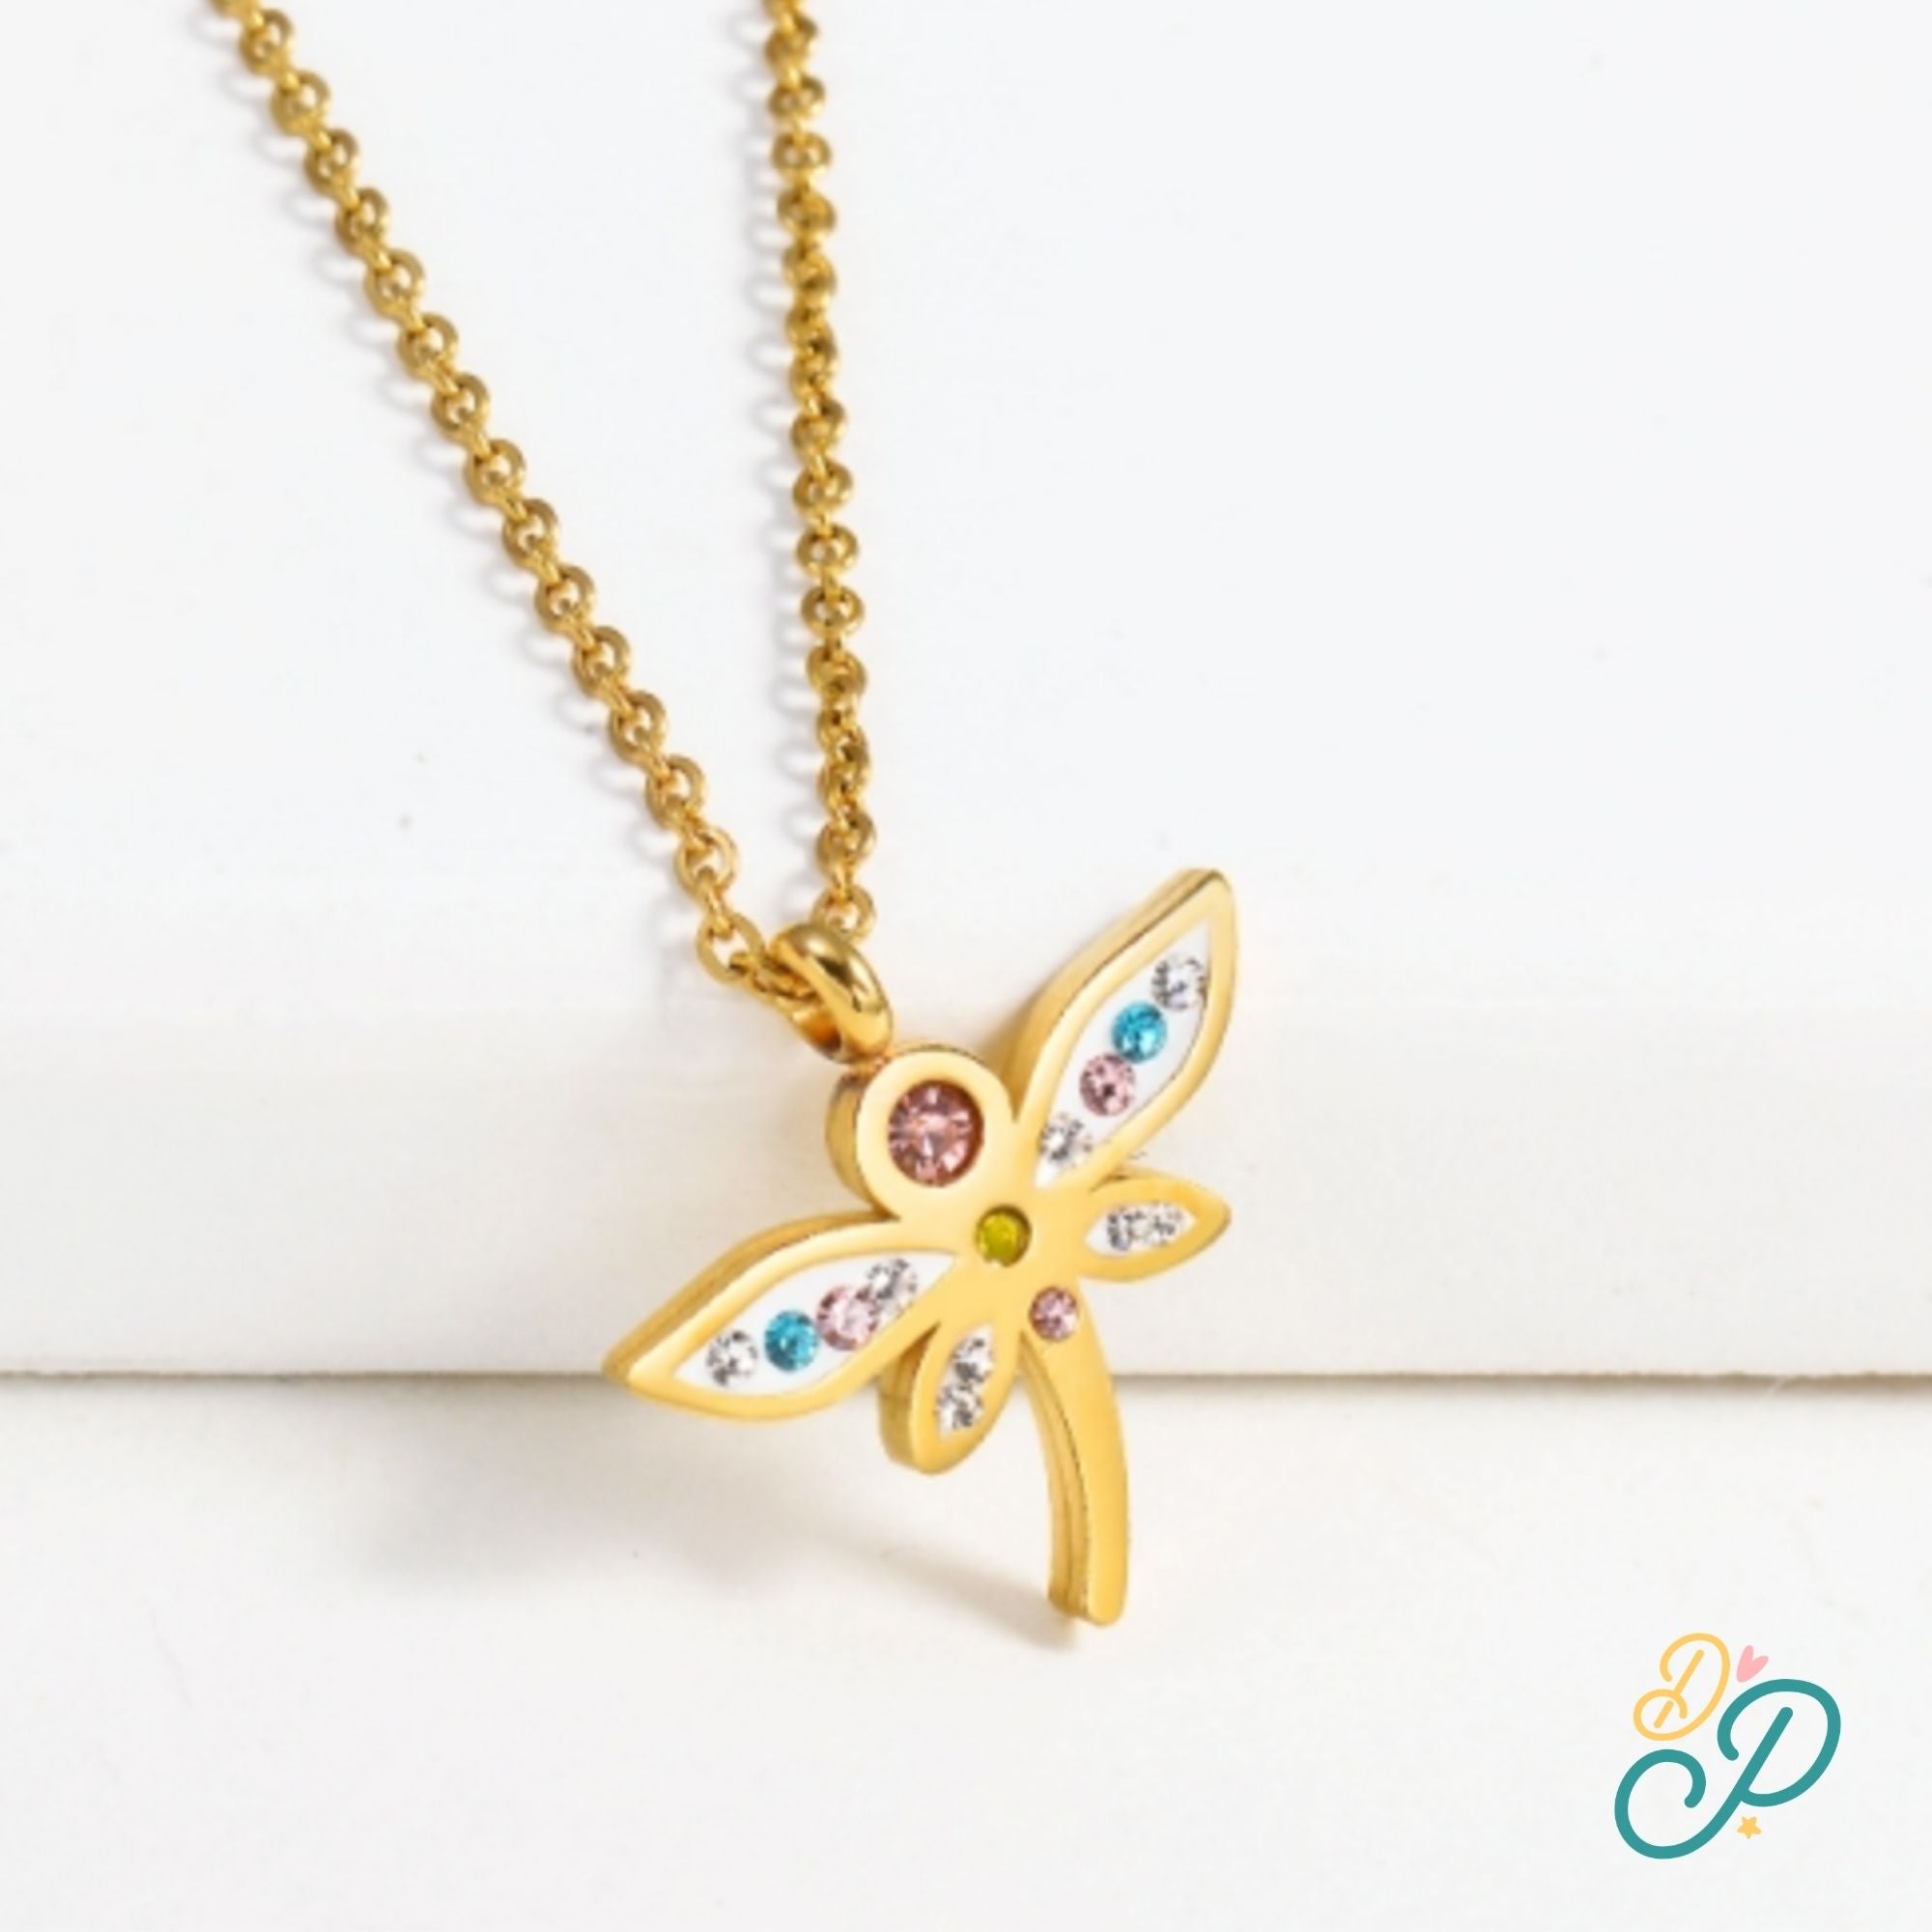 Adorable Stainless Steel Dragonfly Necklace